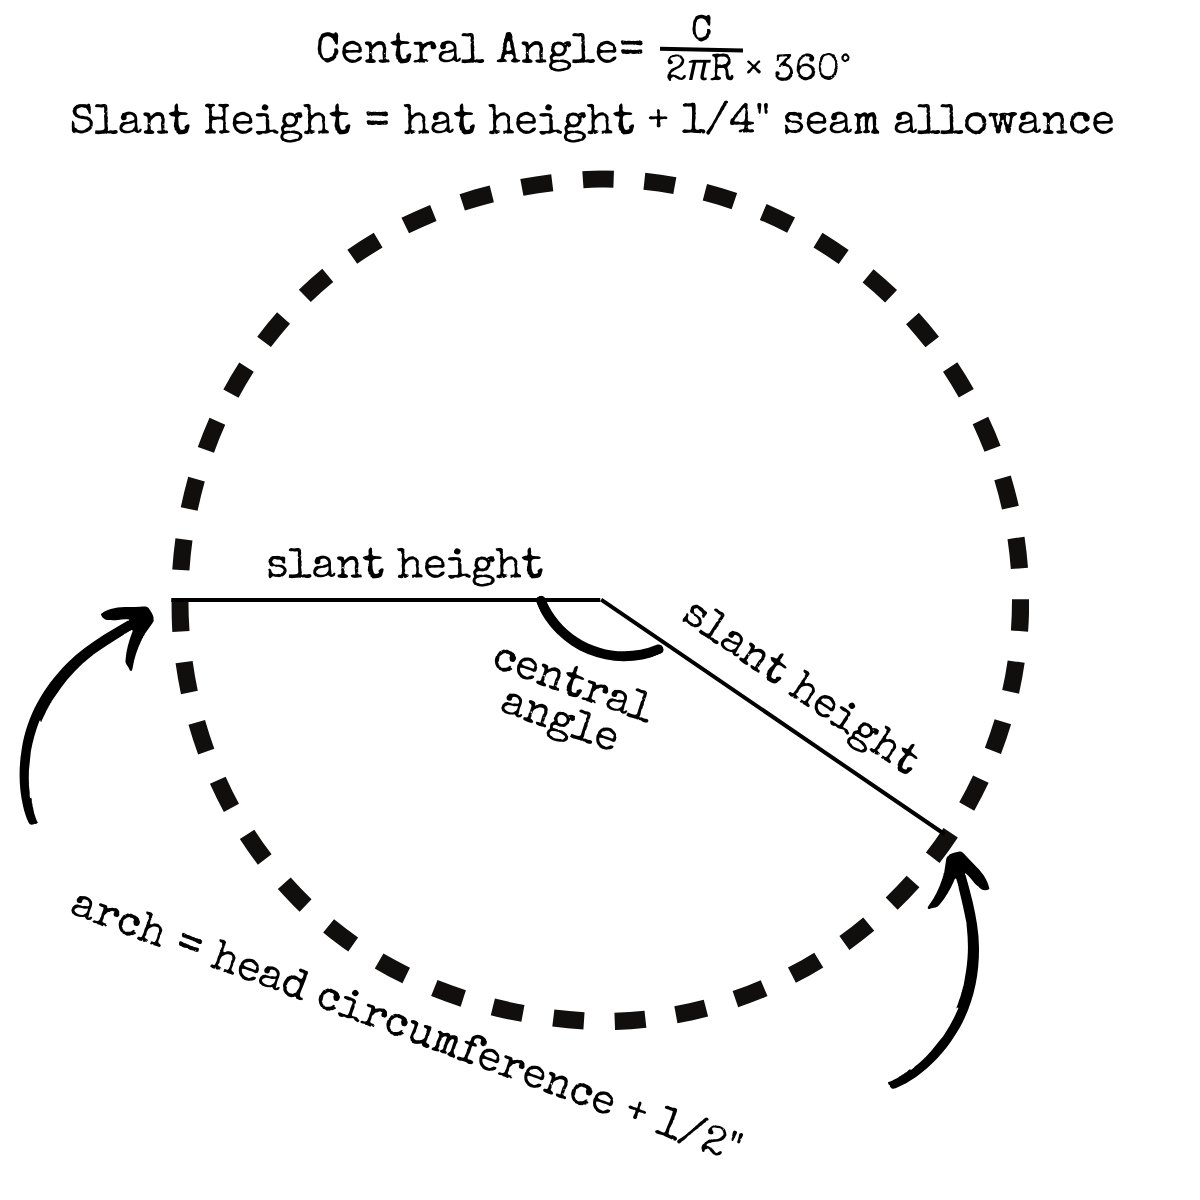 Diagram for making a cone including equation for slant height, arch and angle.